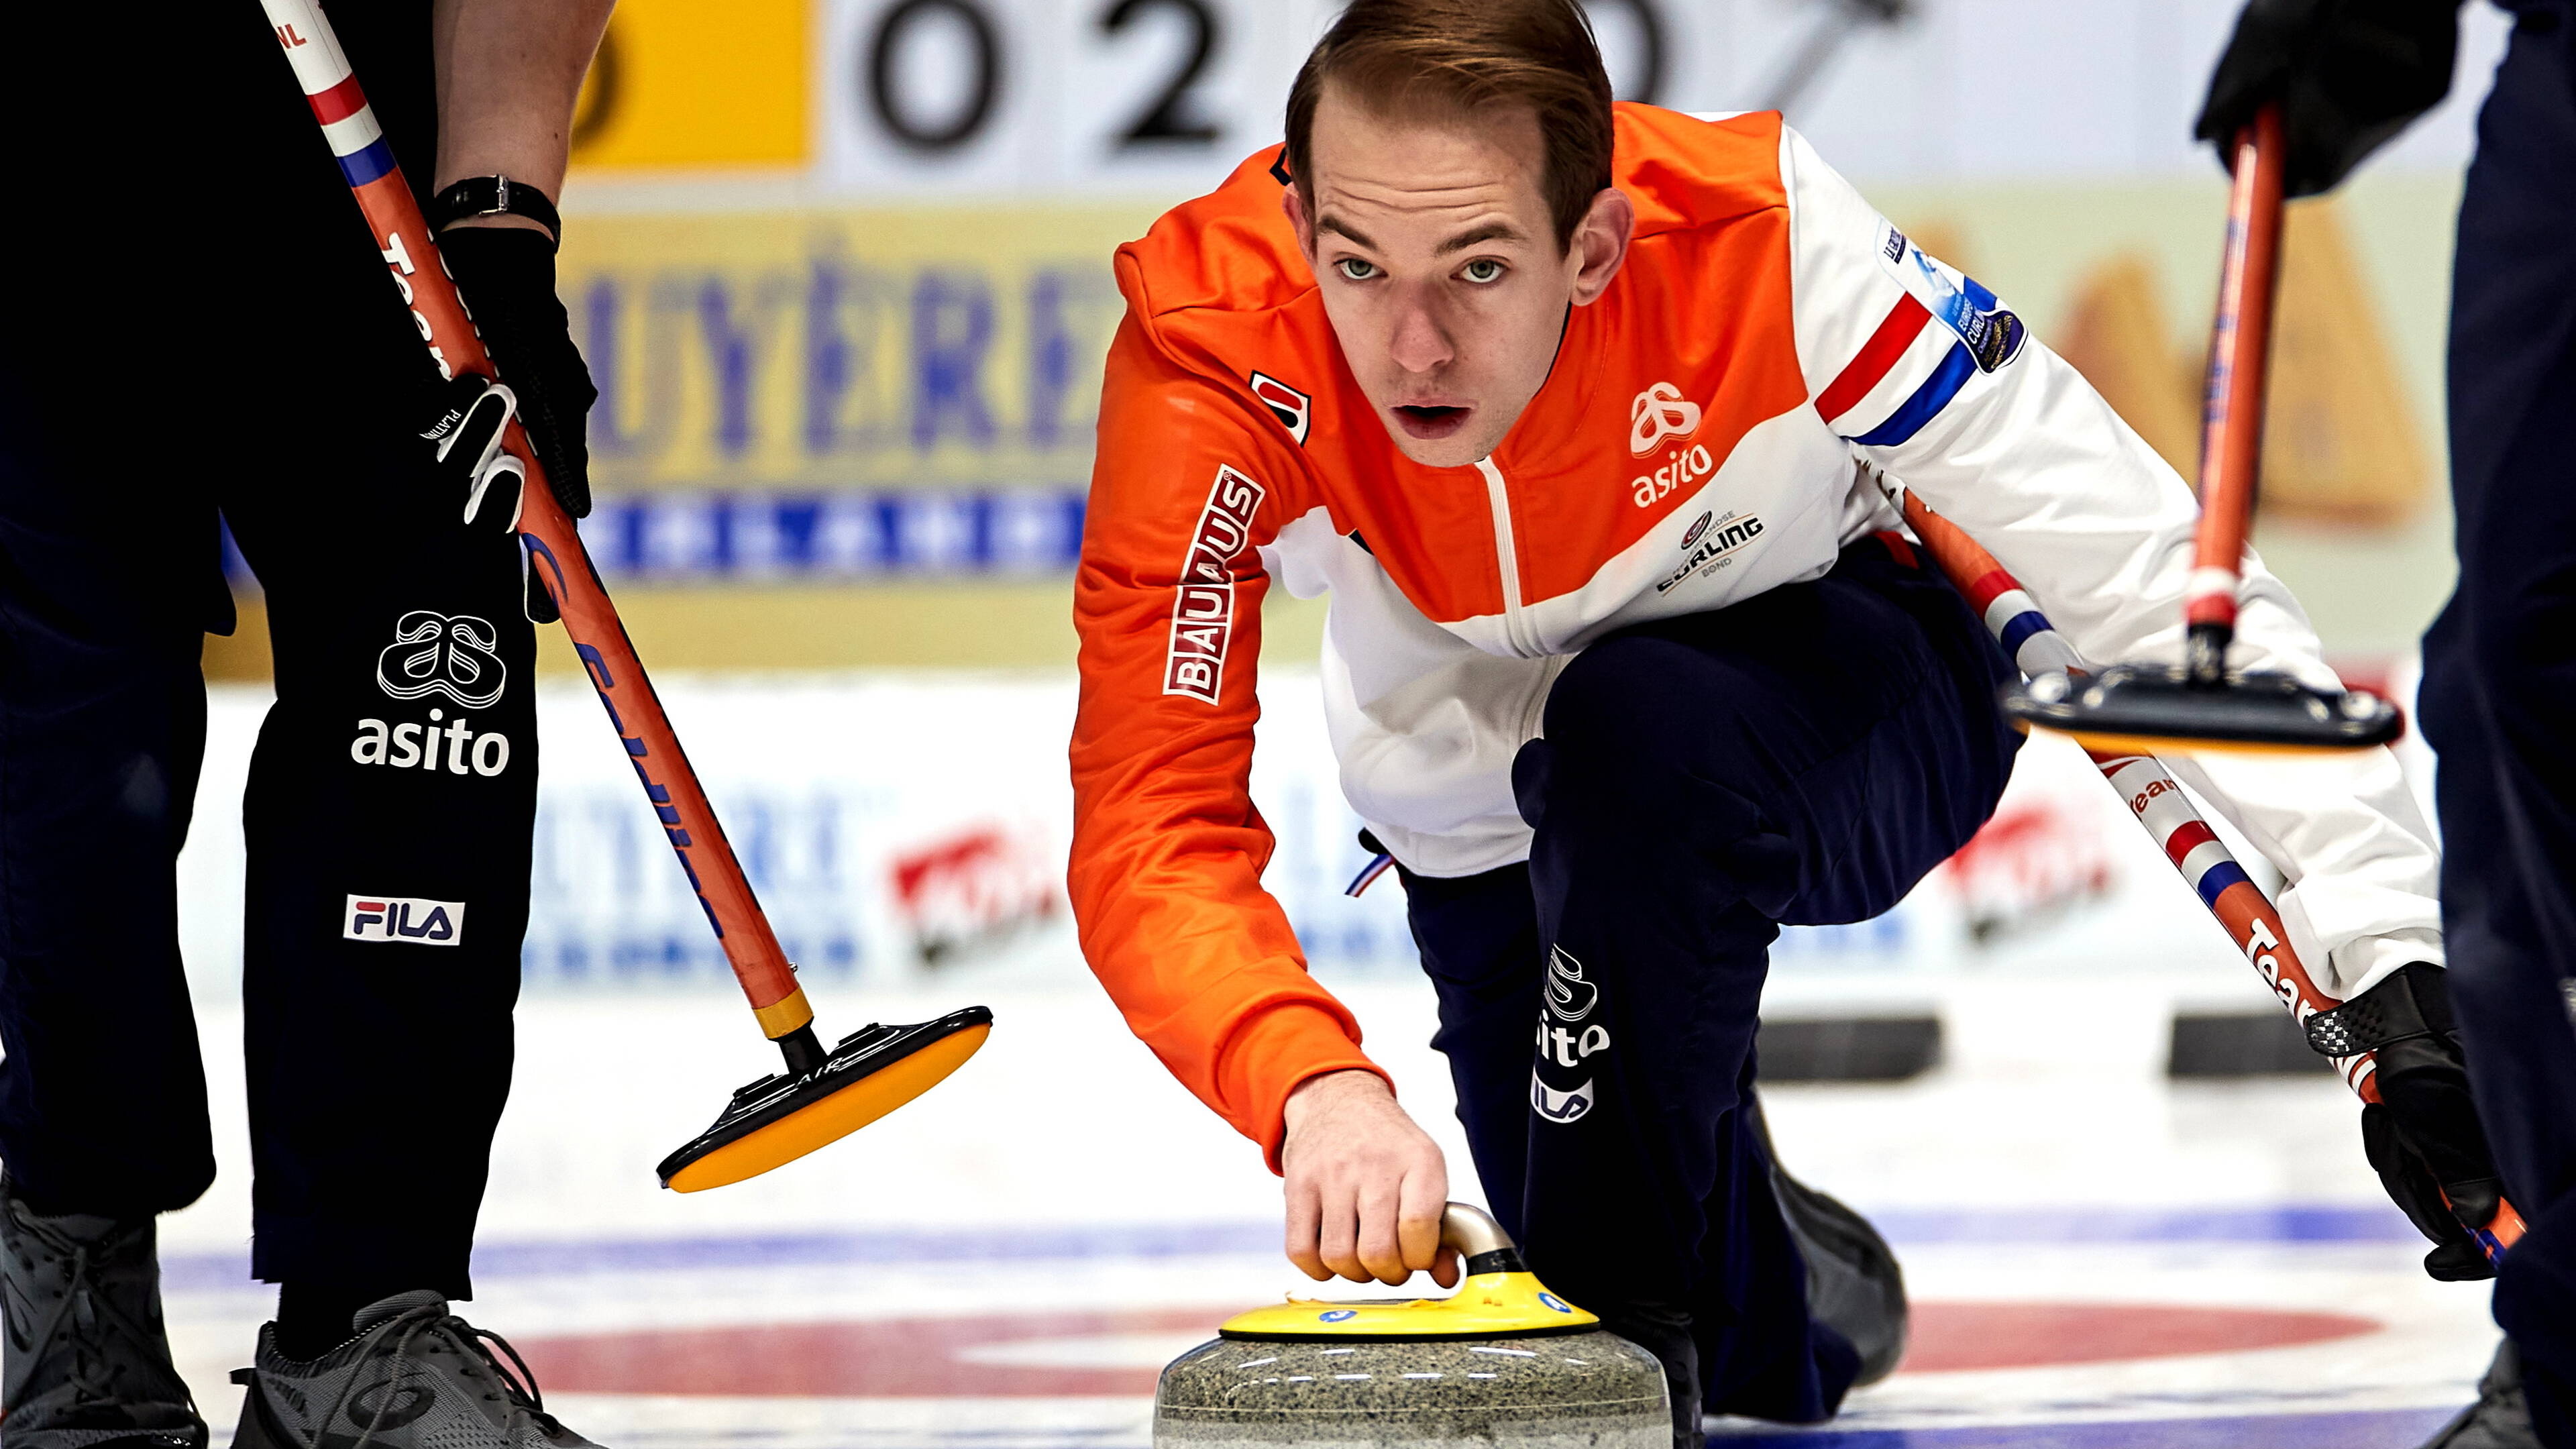 Curling: Wouter Gosgens, A Dutch curler, The 2017 European Youth Olympic Winter Festival silver medalist. 3840x2160 4K Background.